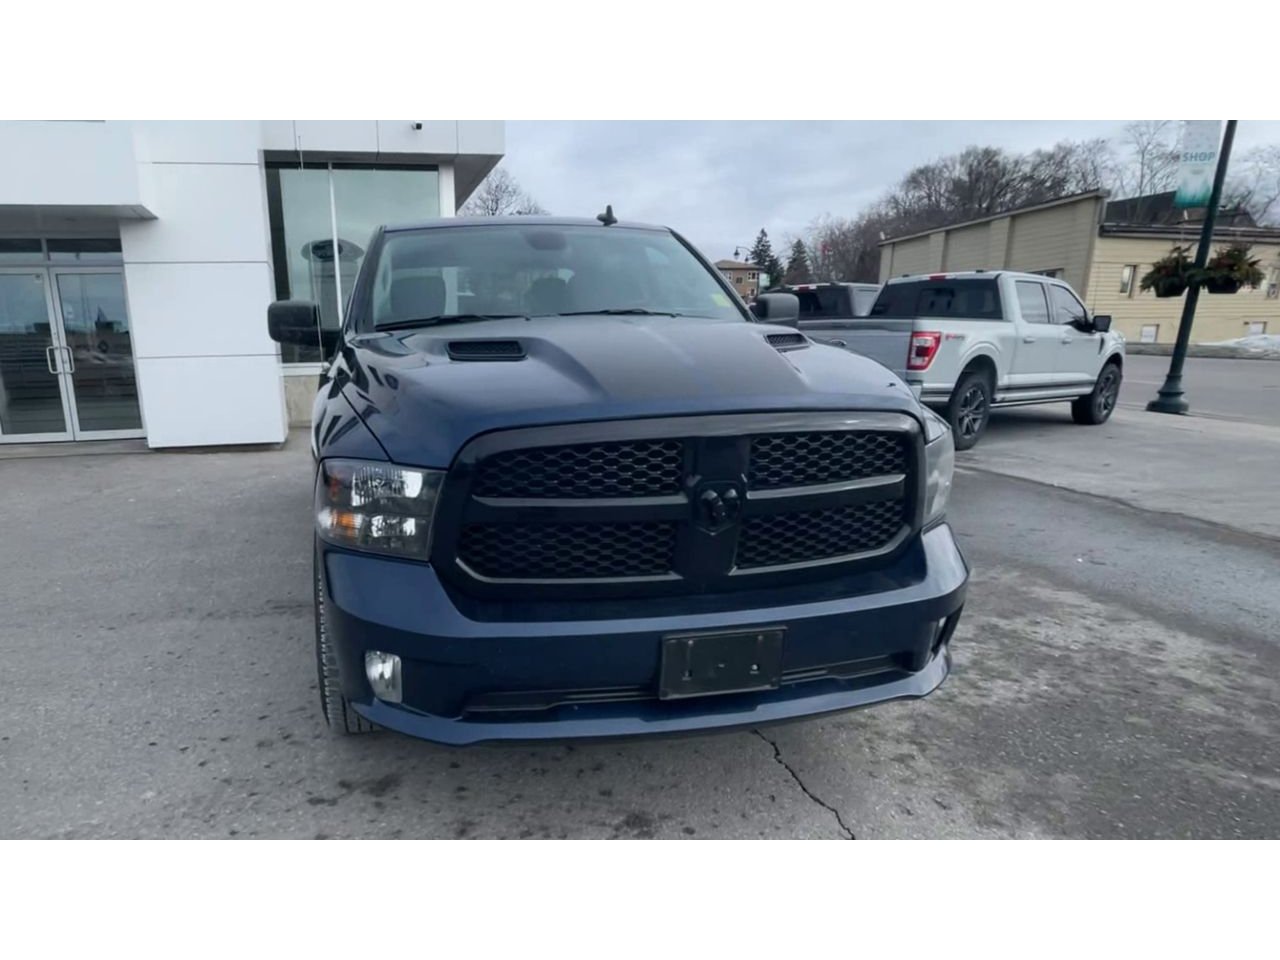 2021 Ram 1500 Classic Express - P21057F Mobile Image 2